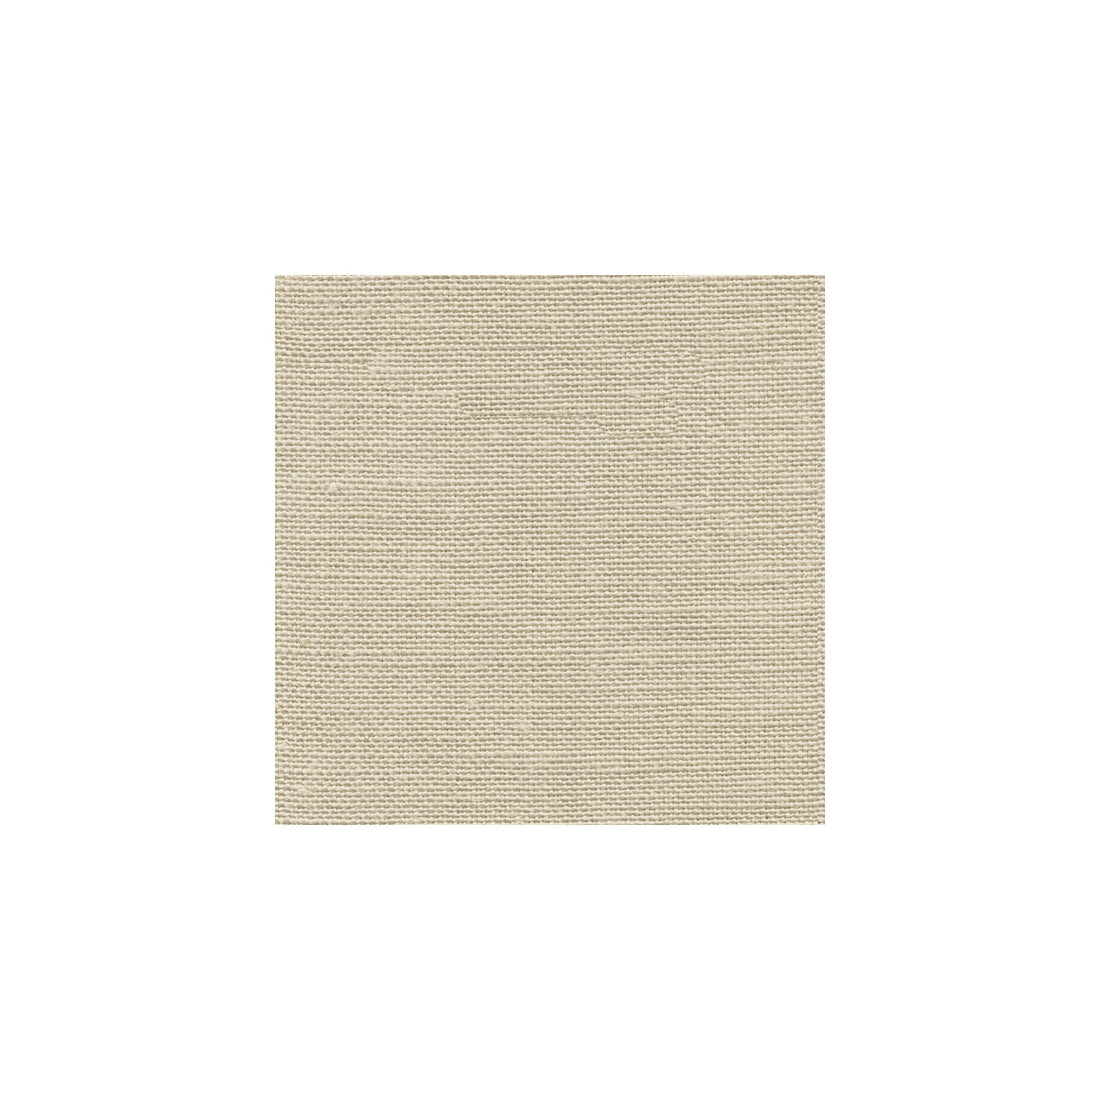 Madison Linen fabric in sand color - pattern 32330.1116.0 - by Kravet Design in the Gis collection